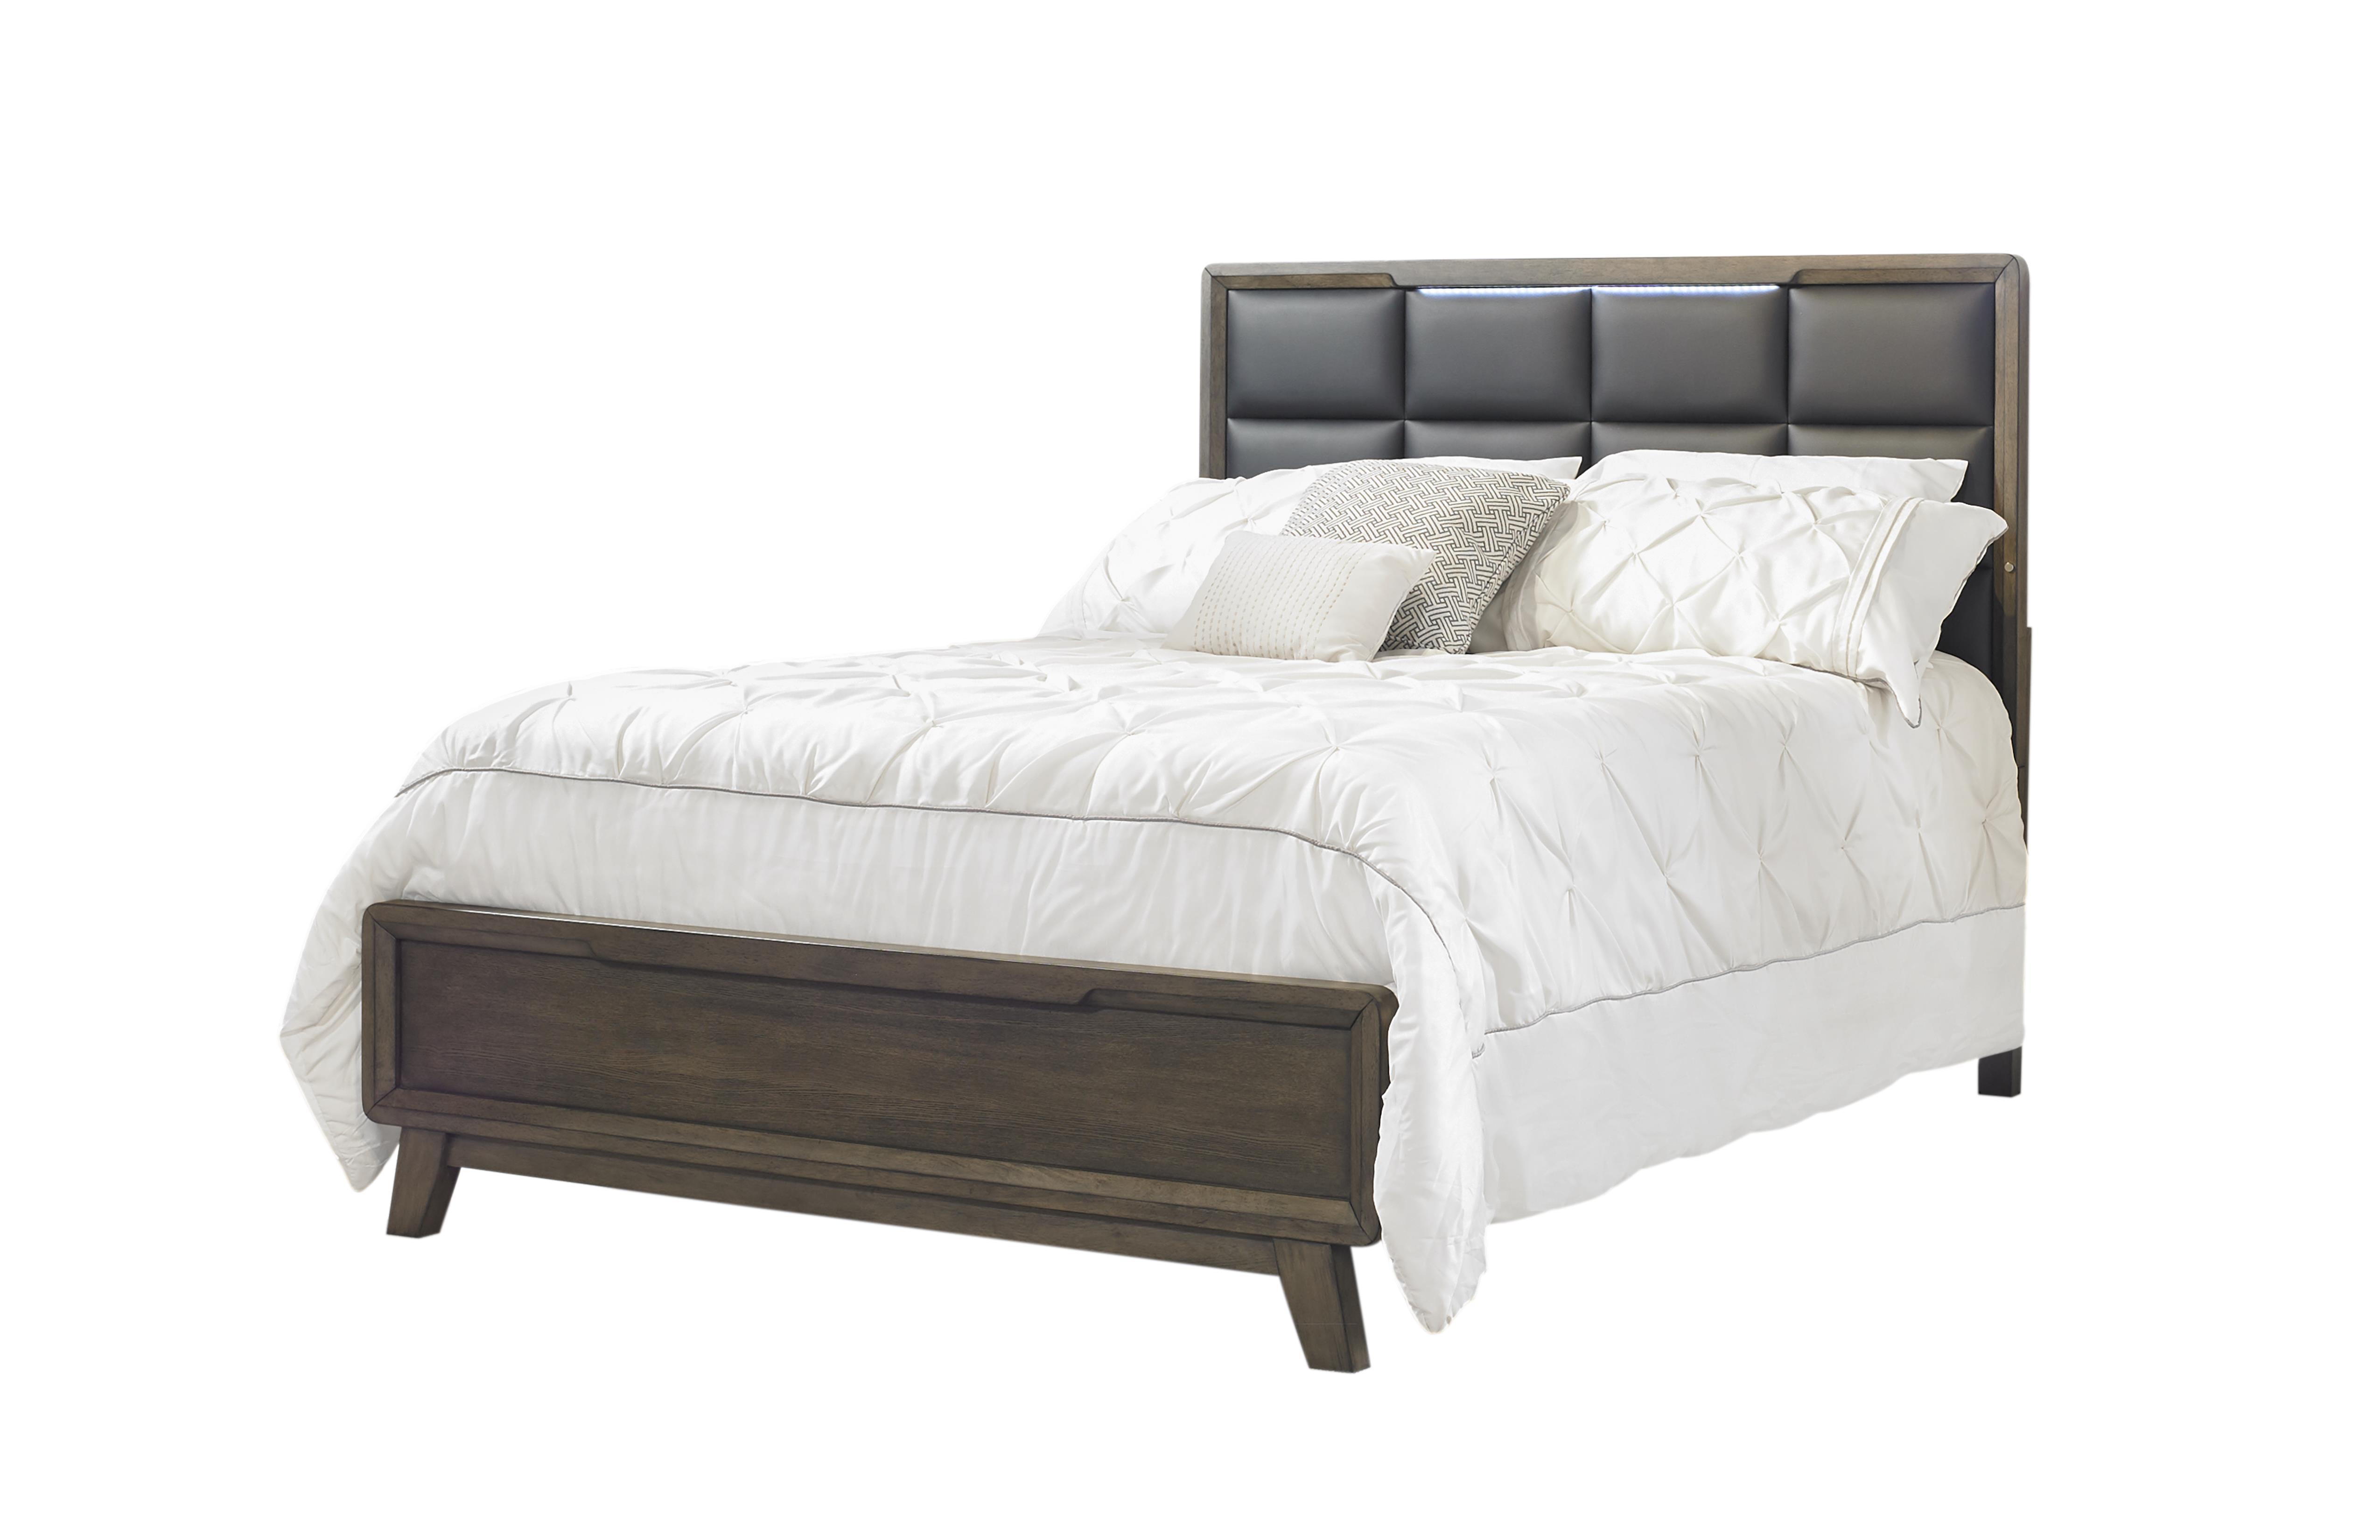 Contemporary, Modern Panel Bed VALENCIA 213-105 213-105 in Coffee, Brown Faux Leather